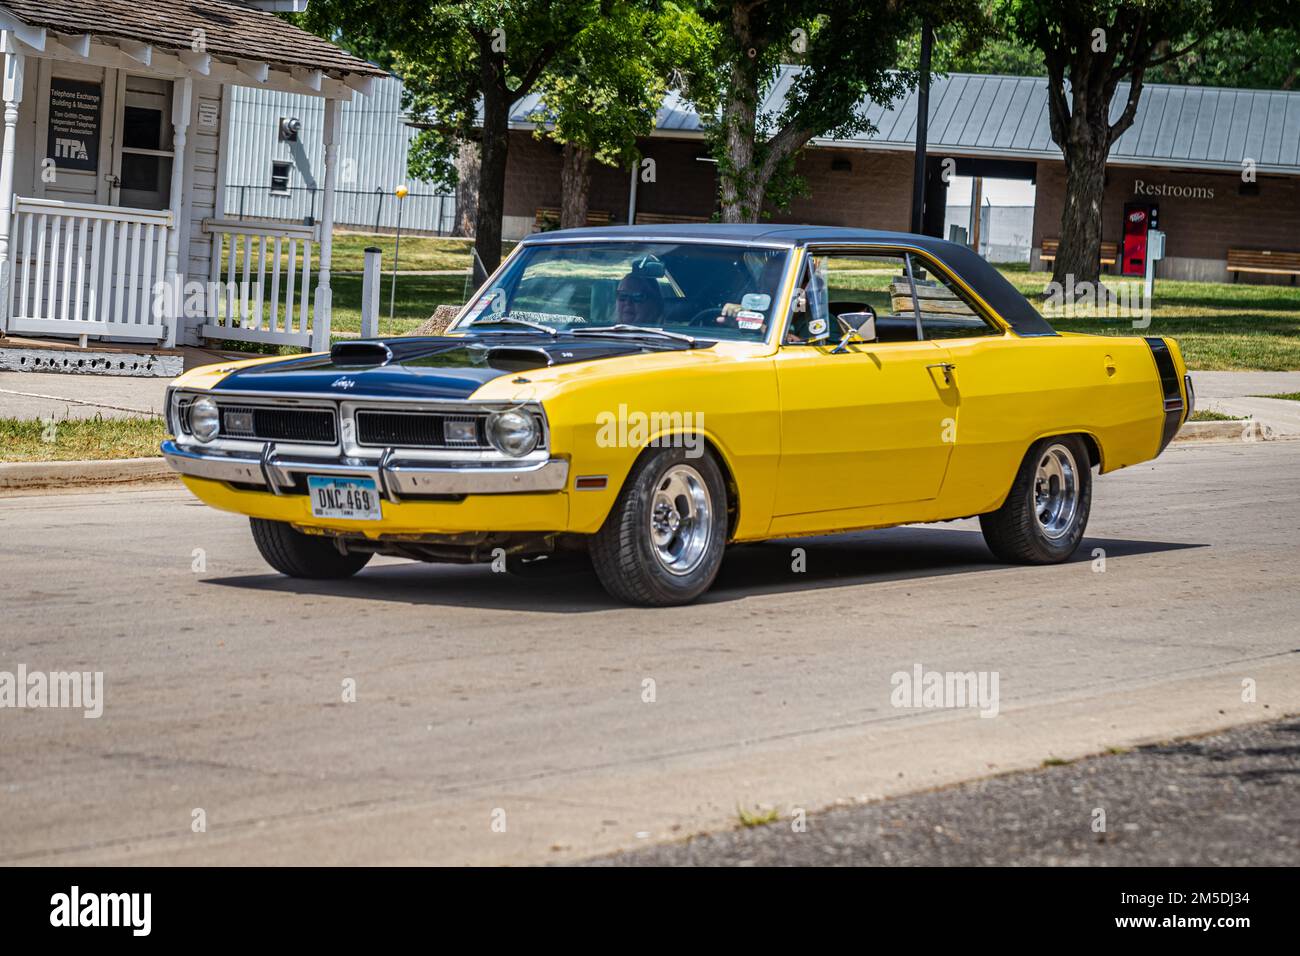 Dodge dart 1970 hi-res stock photography and images image picture